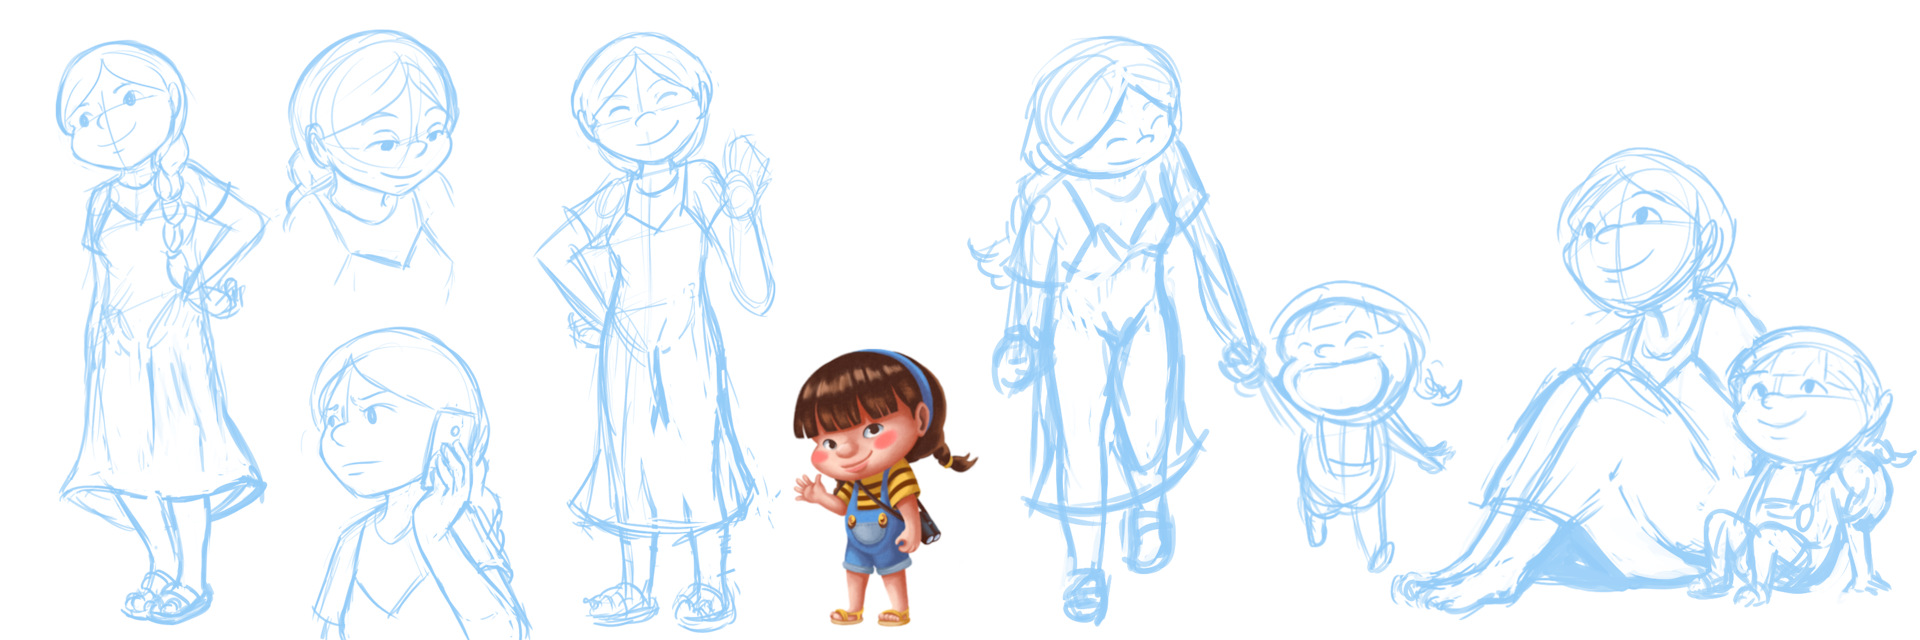 Initial sketches for Ah Tin's character